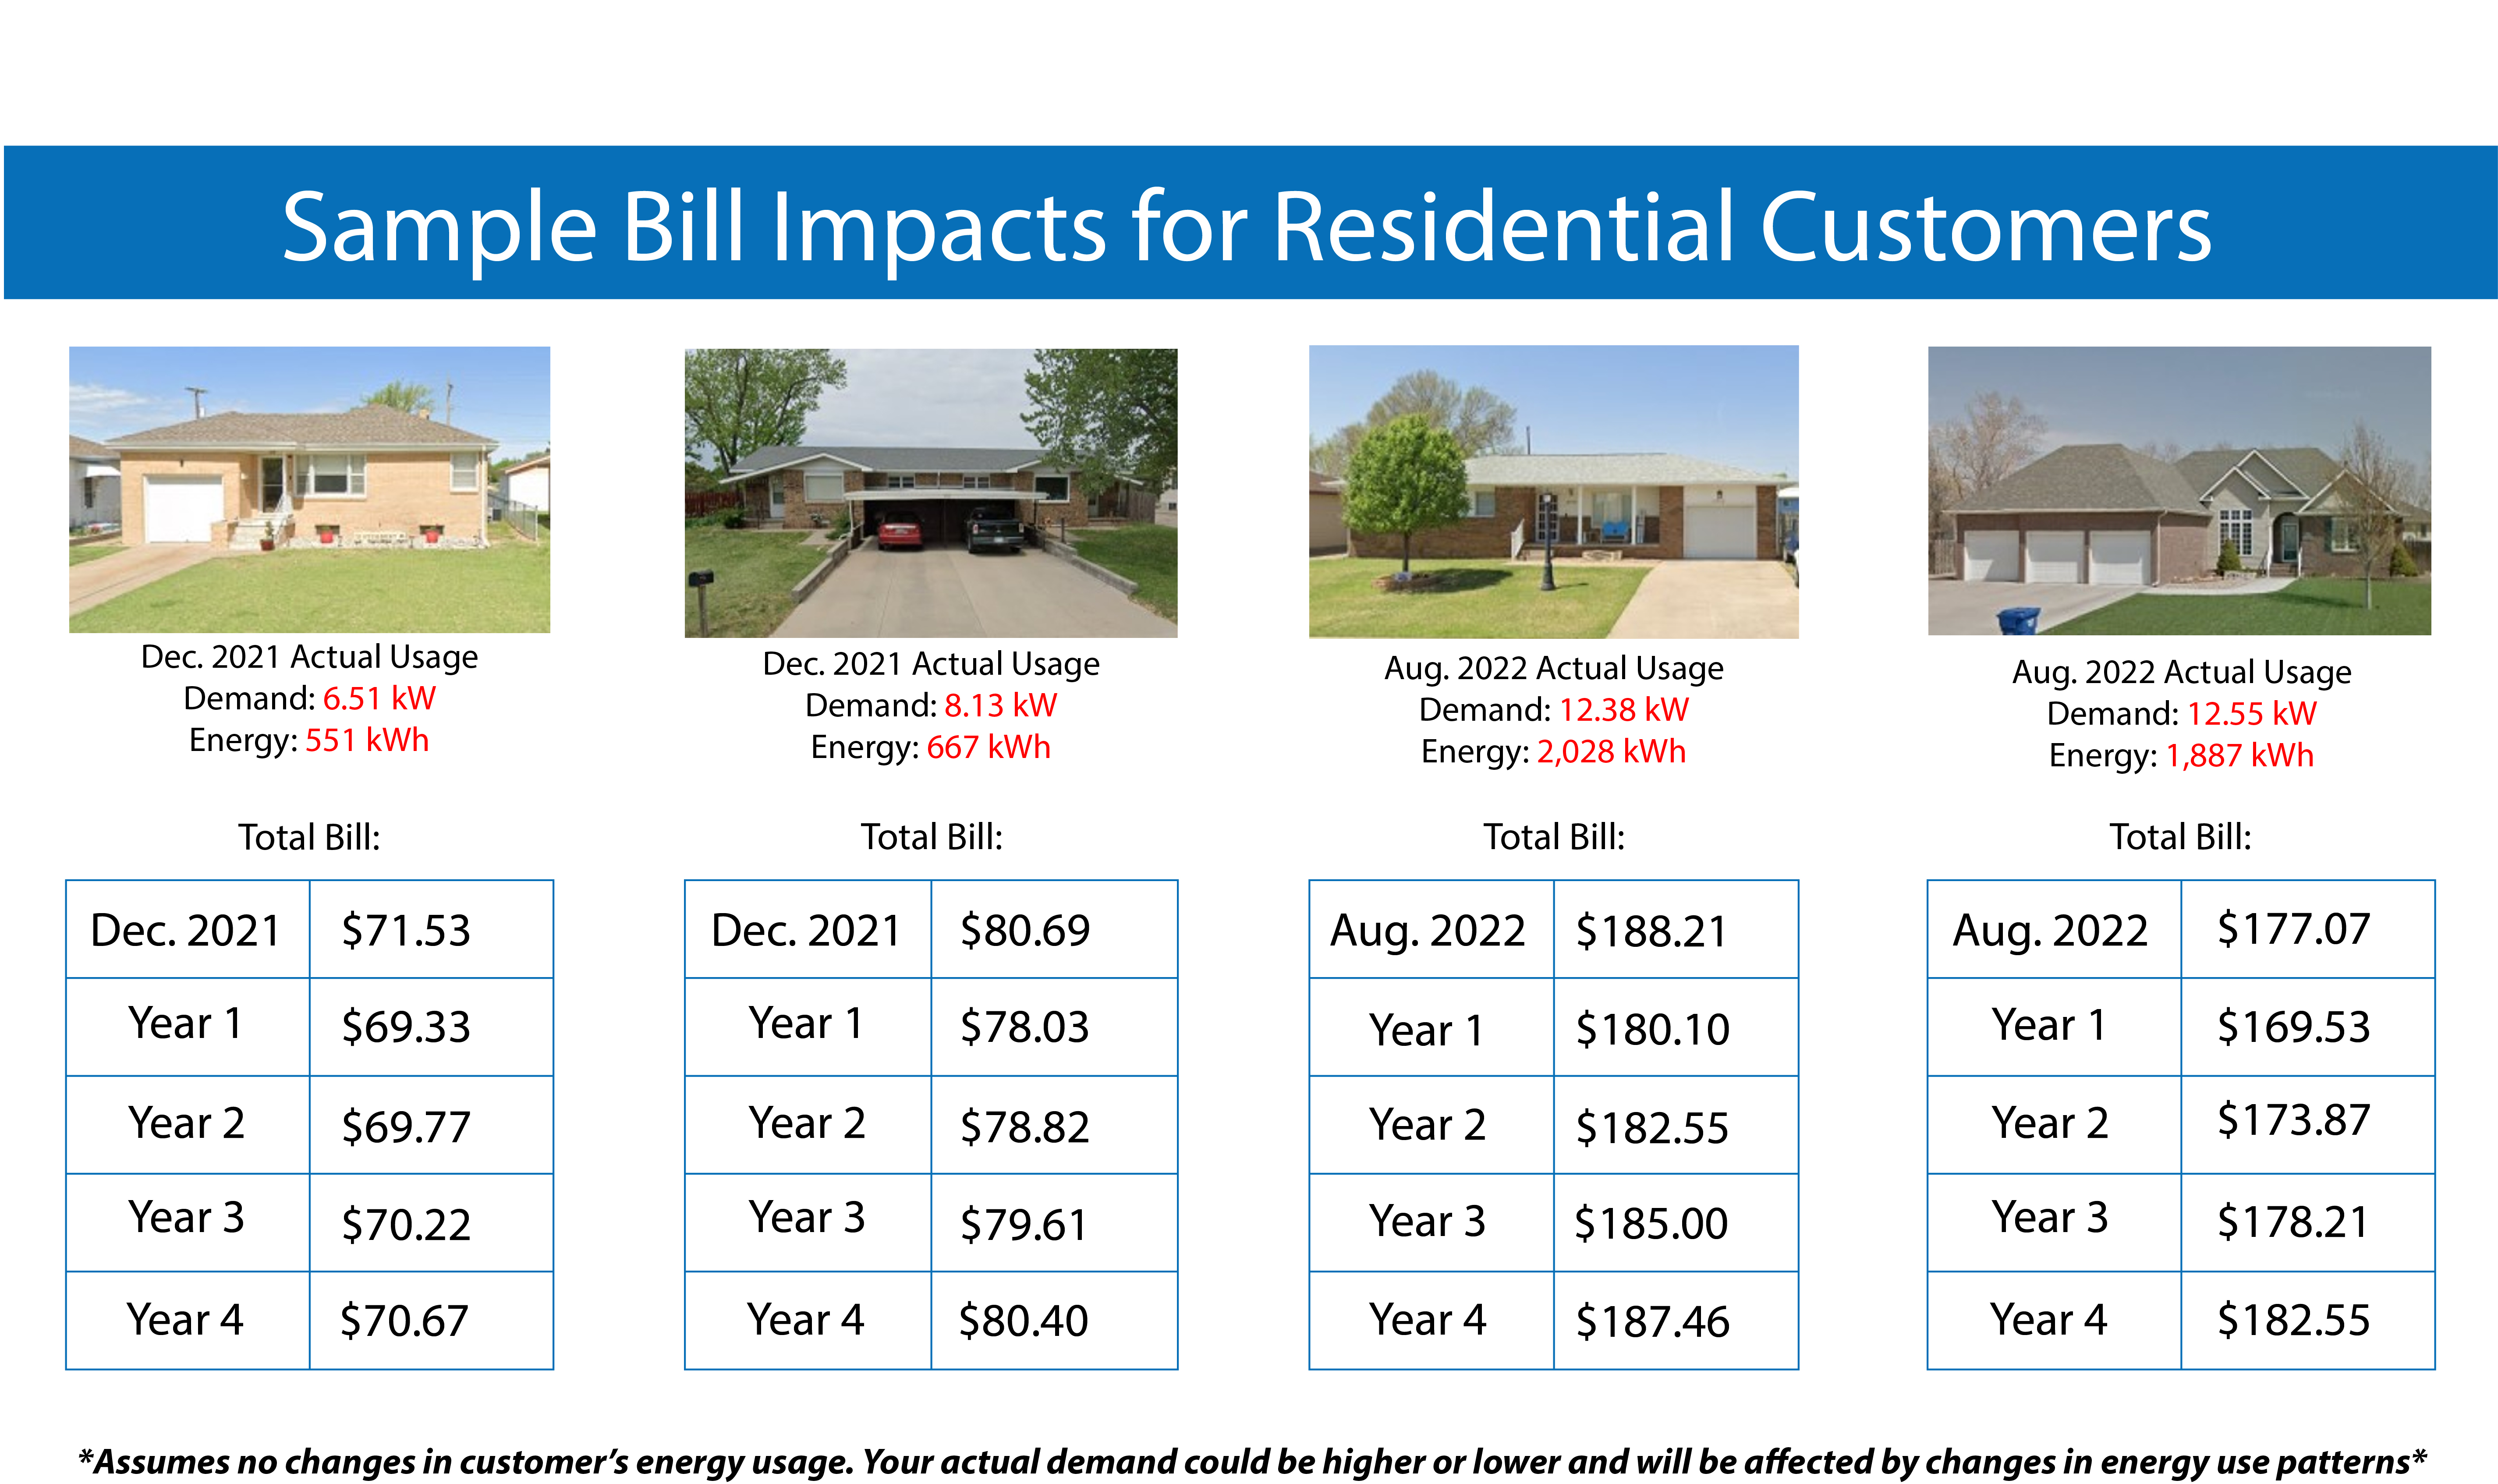 Chart showing sample bill impacts for residential customers, showing four houses of various sizes.